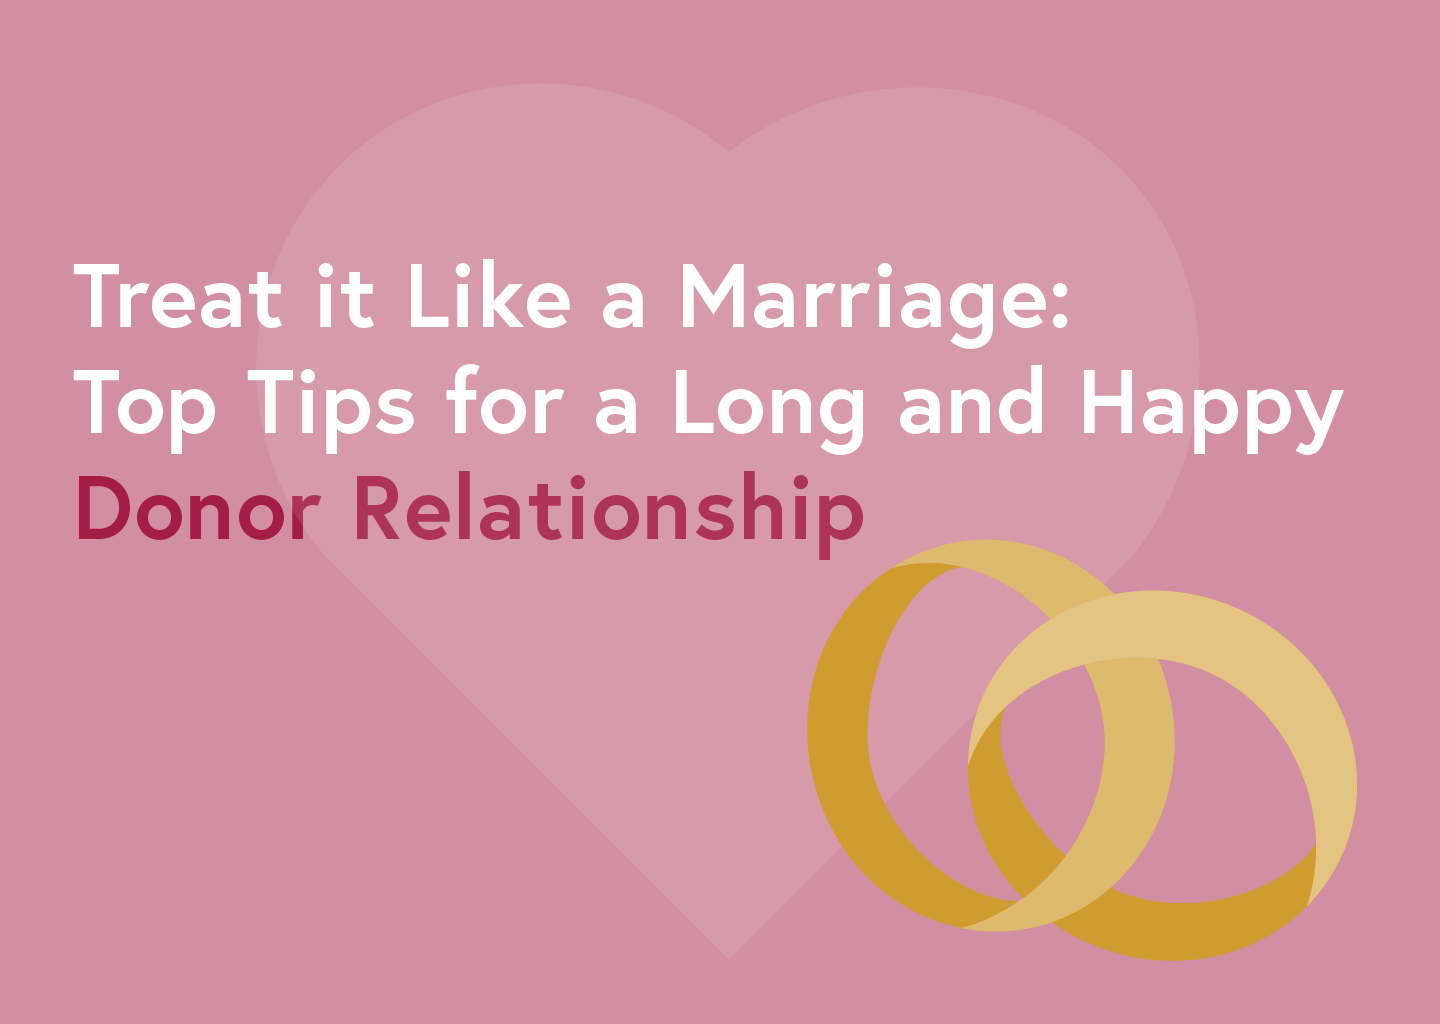 Donor Relationships: Why You Should Treat Them Like a Marriage